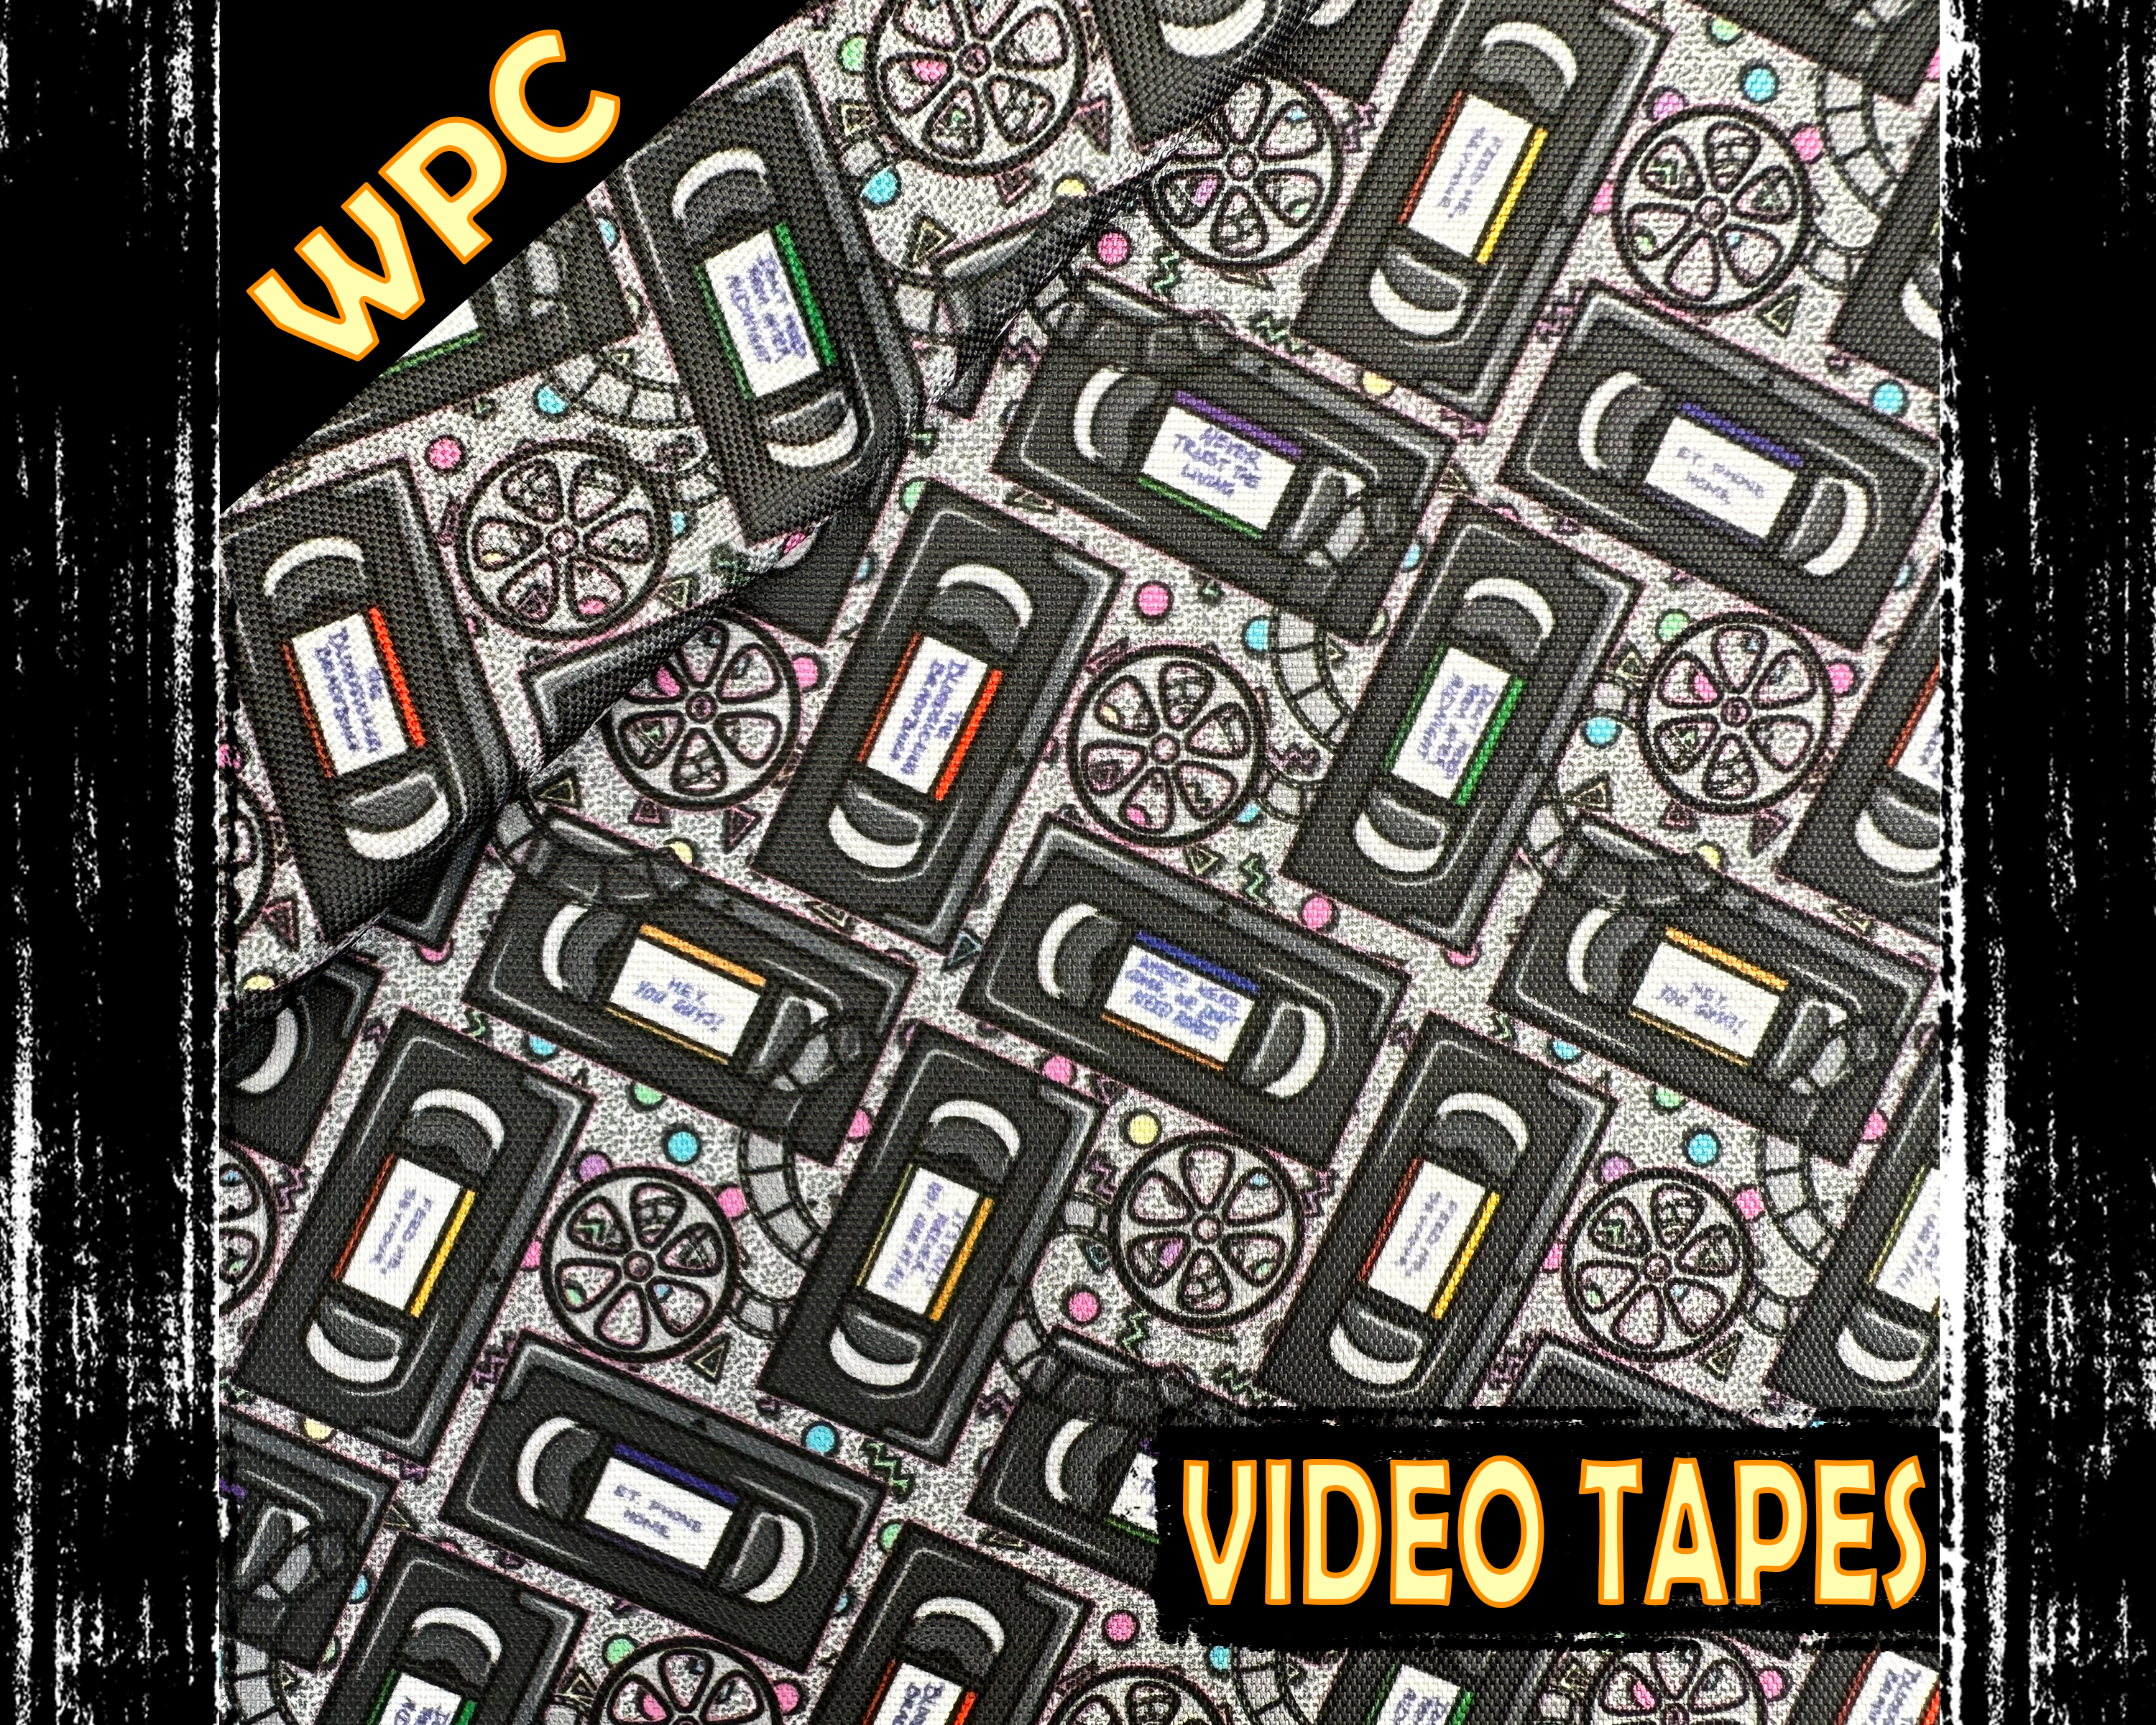 Video Tapes, Retro design, Waterproof Polyester Canvas.